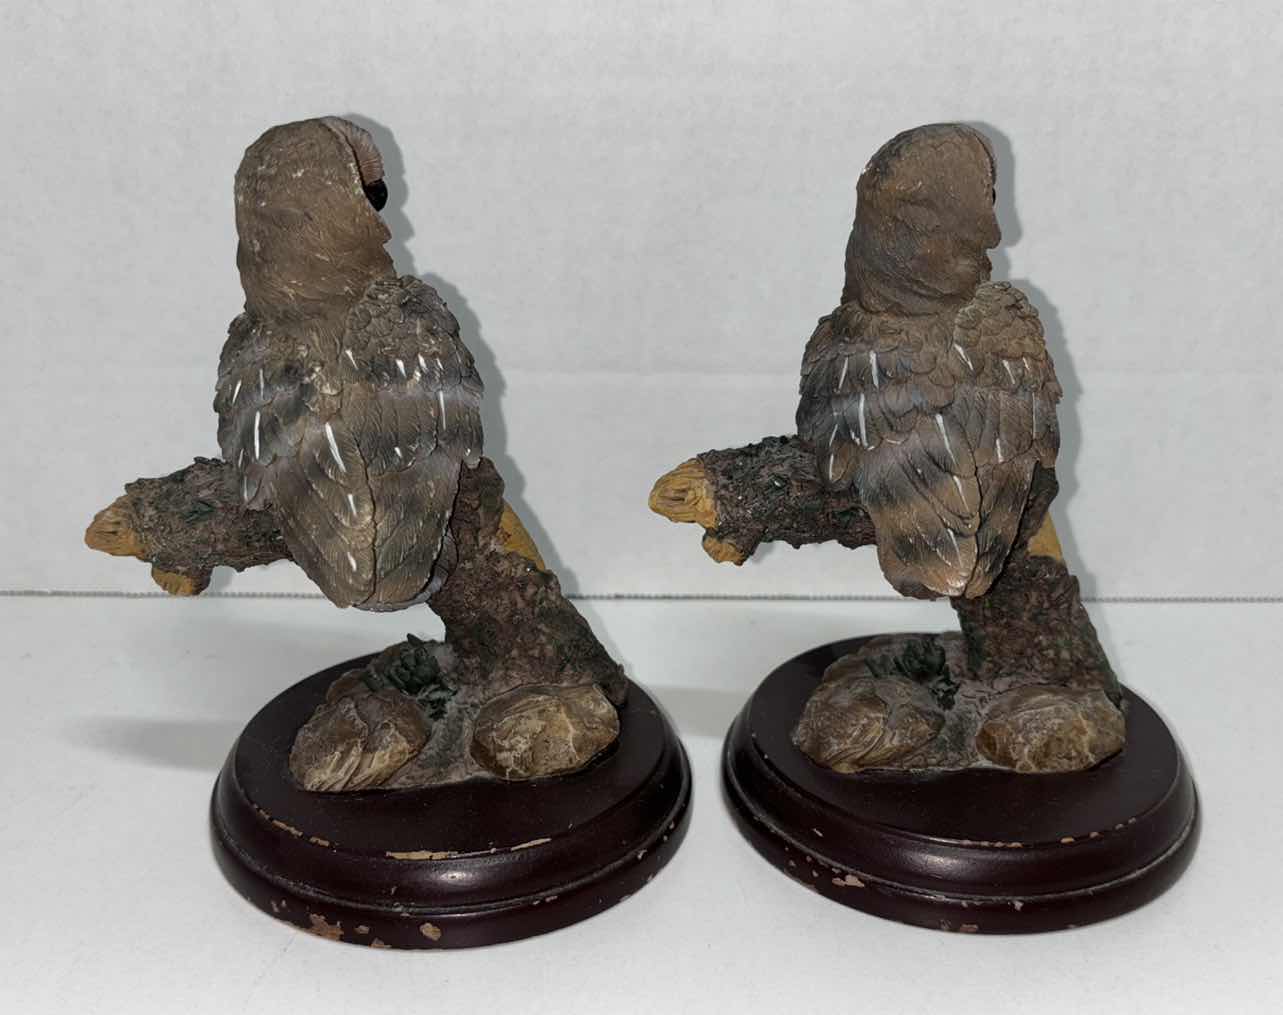 Photo 2 of PAIR OF OWL FIGURINES ON WOOD STANDS 6.25”